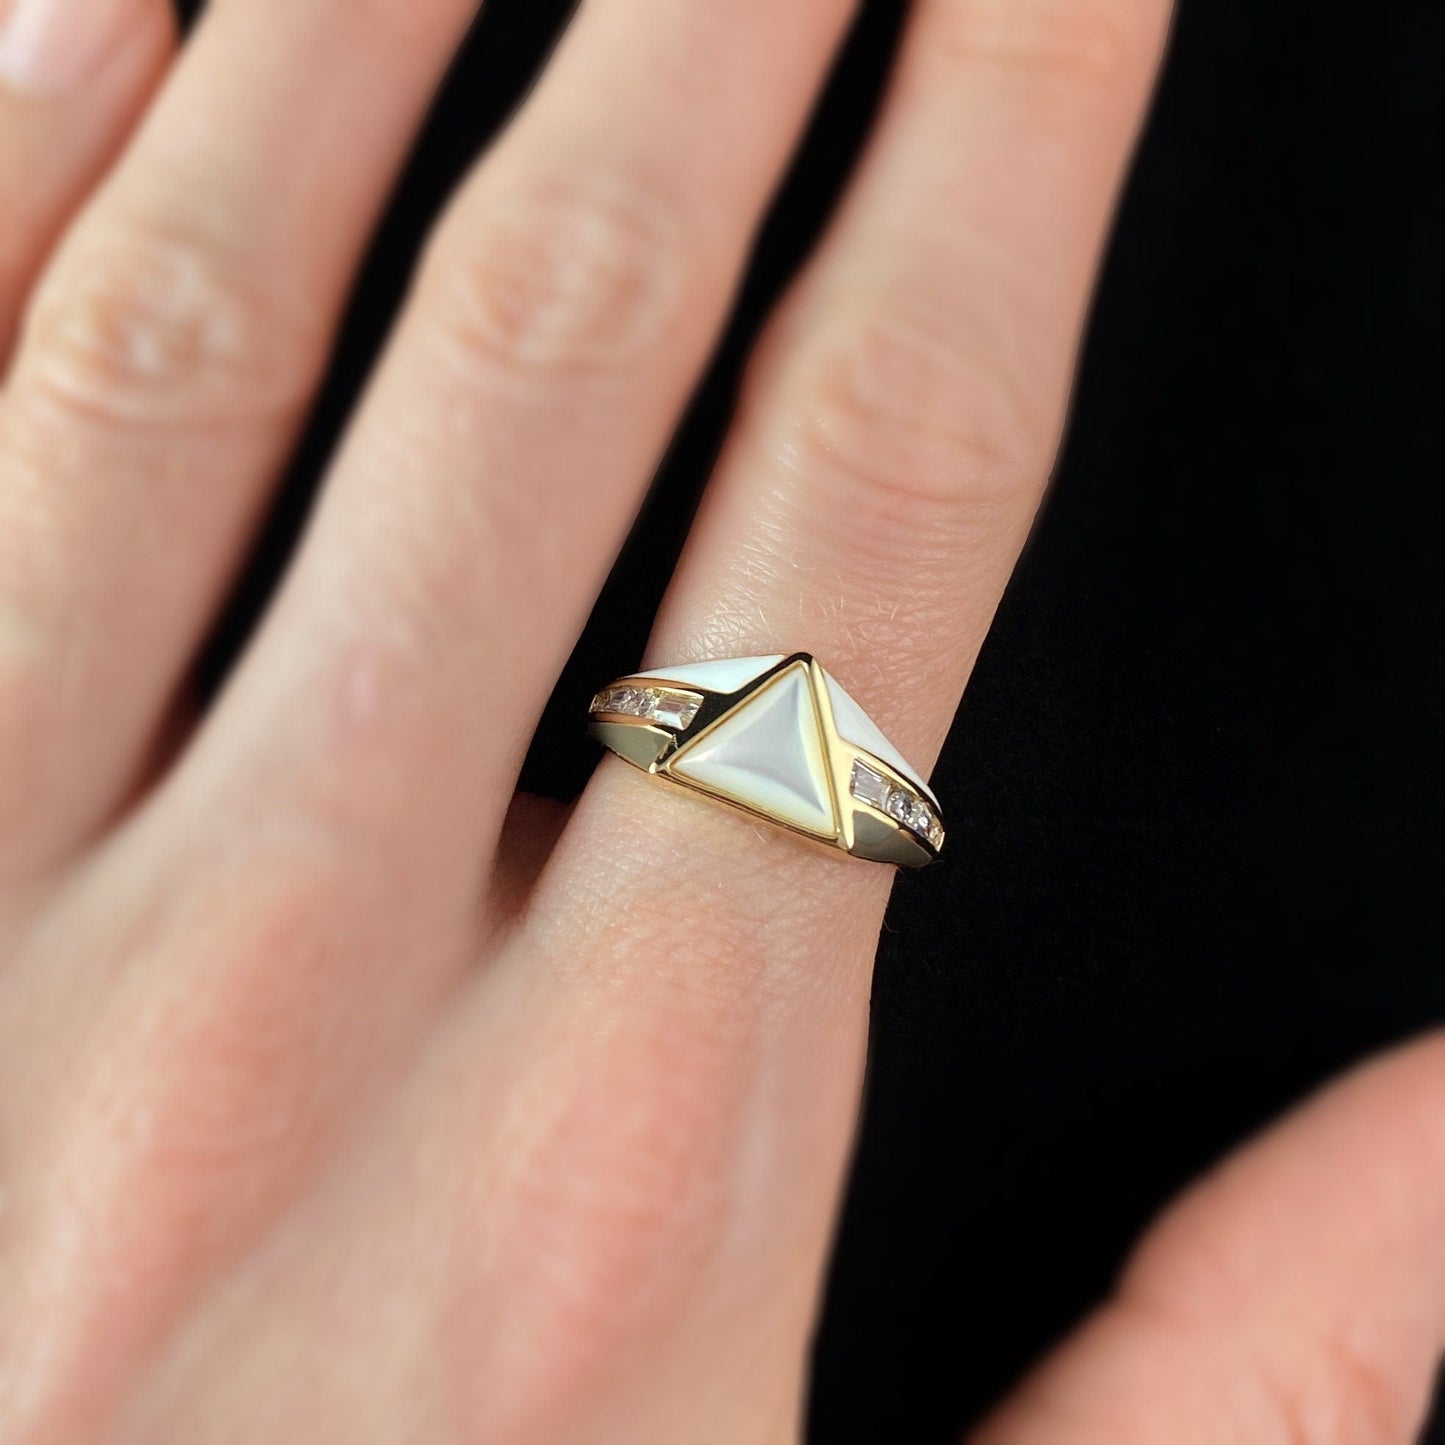 Mother of Pearl Triangle Ring with White/Gray Enamel - Bright Side, Size 7